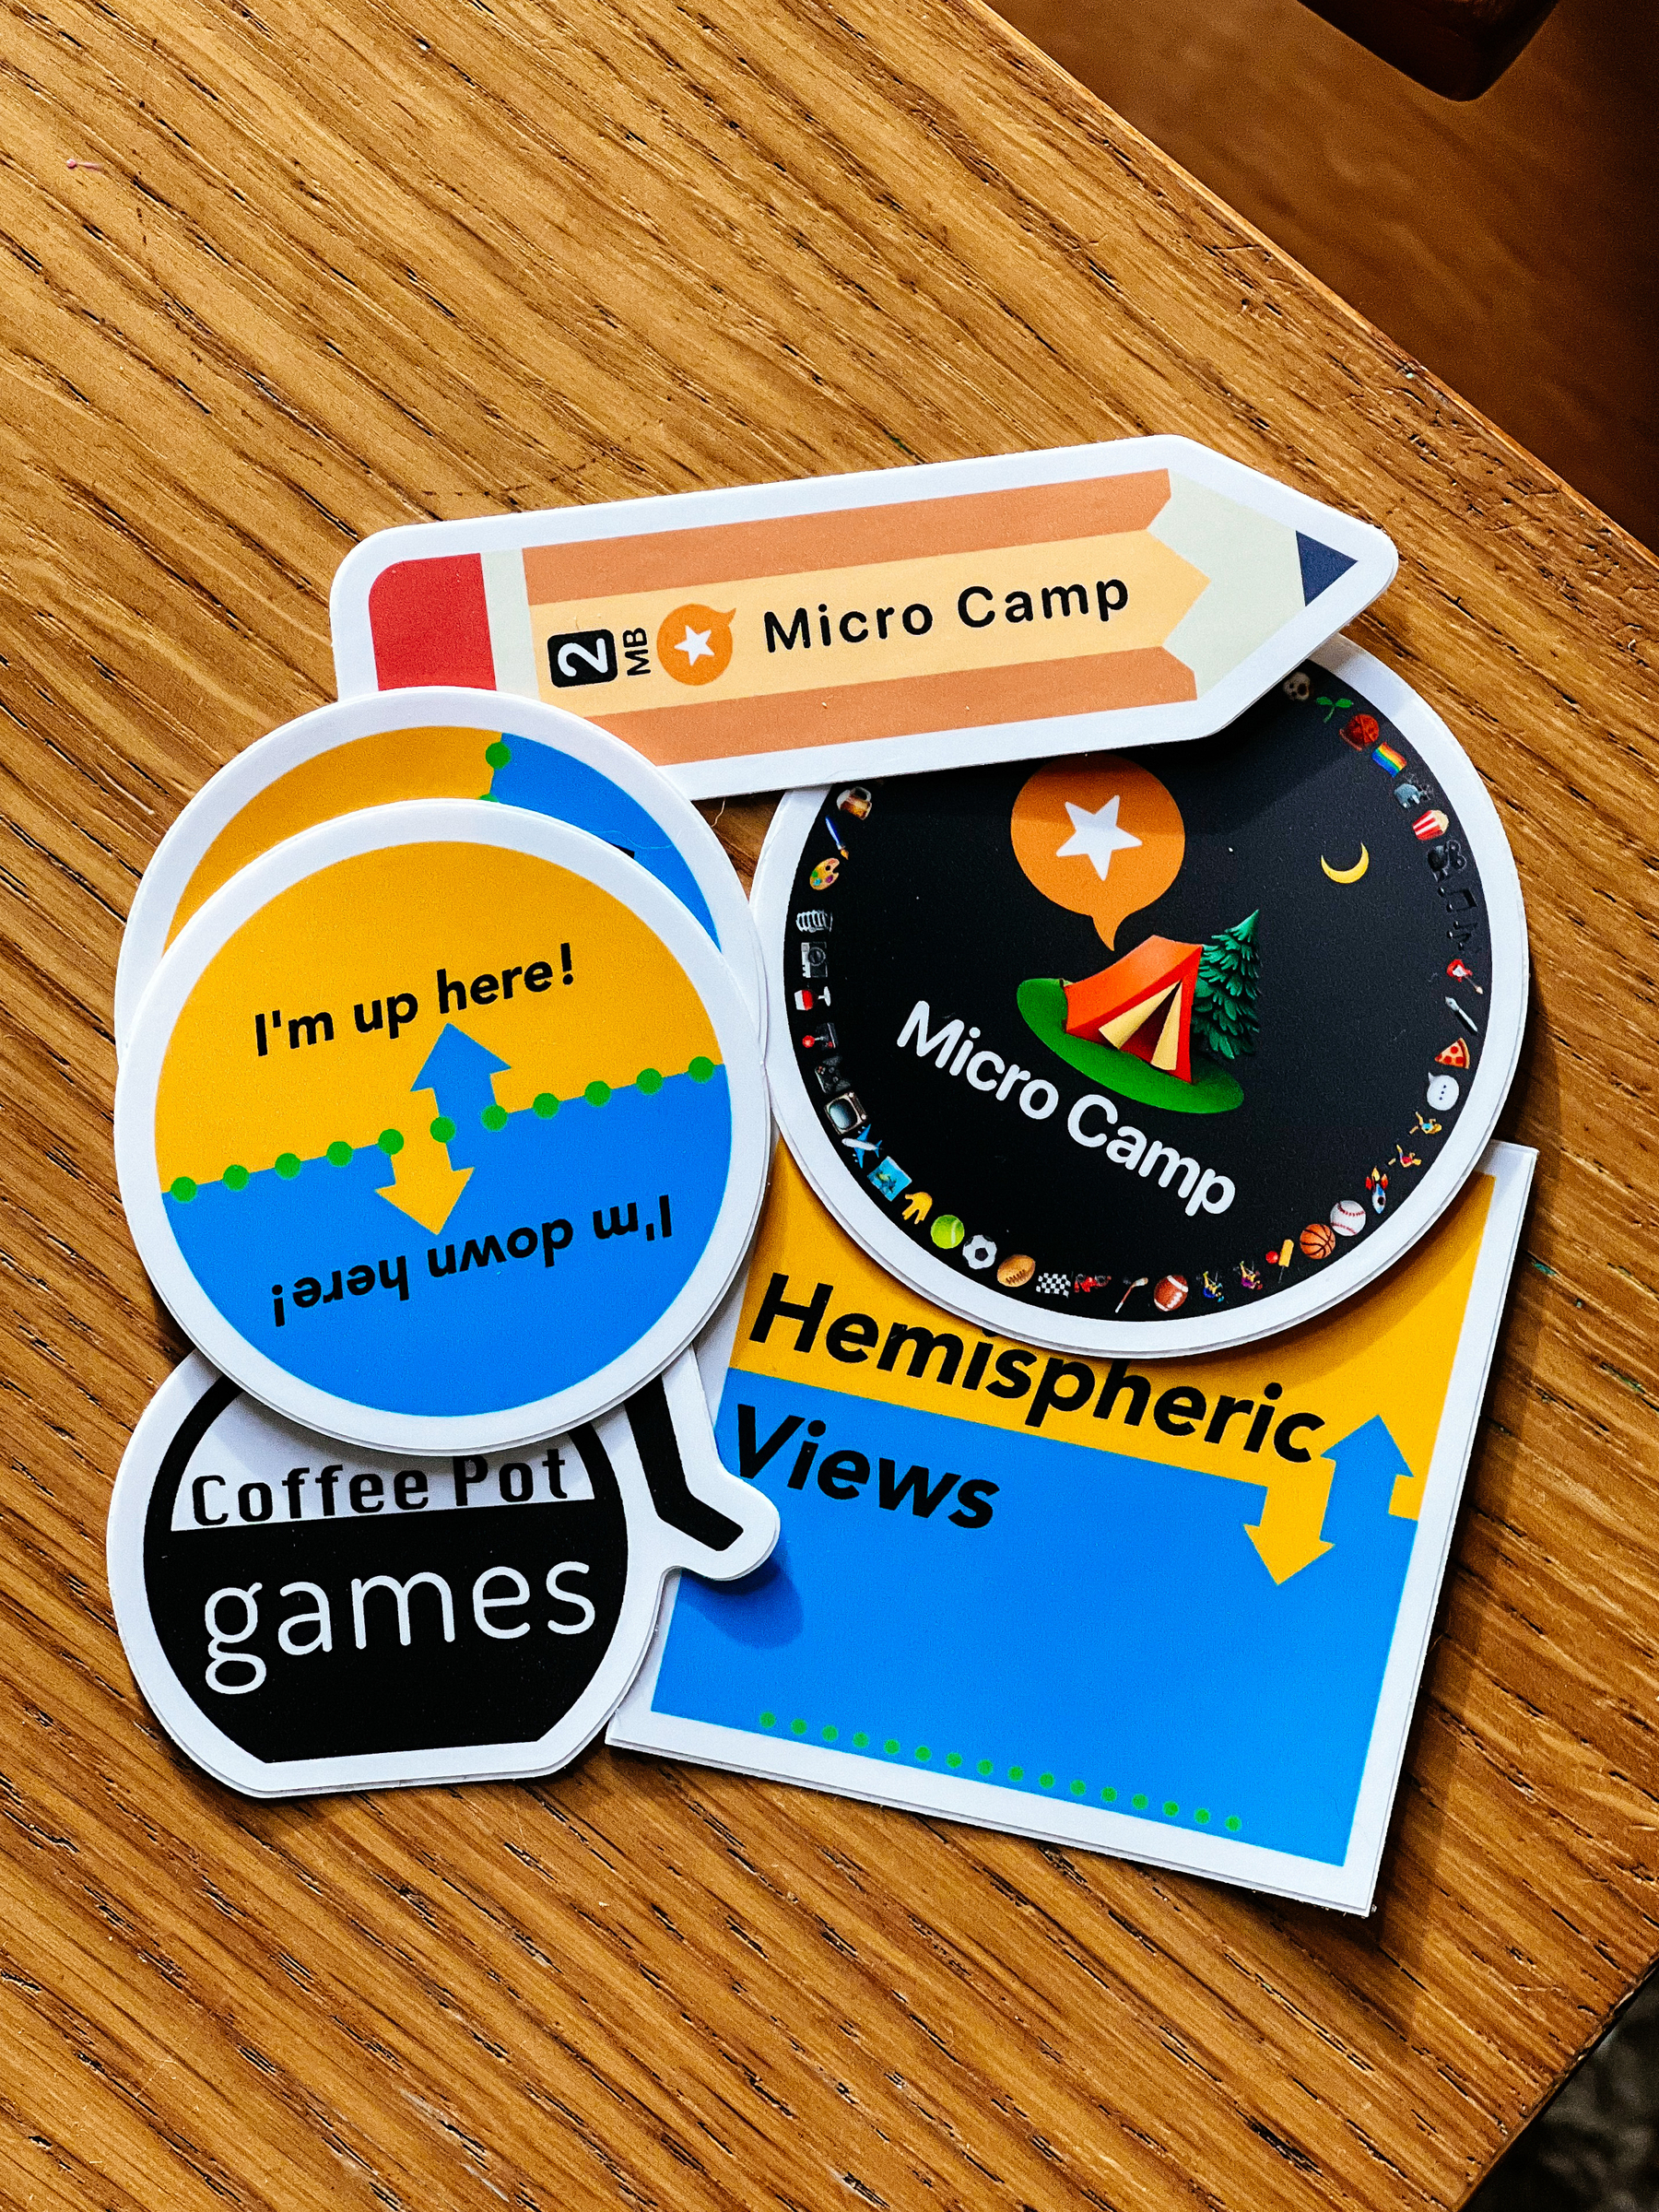 A bunch of sticker on a table. Hemispheric Views, Micro.camp, and a few others.